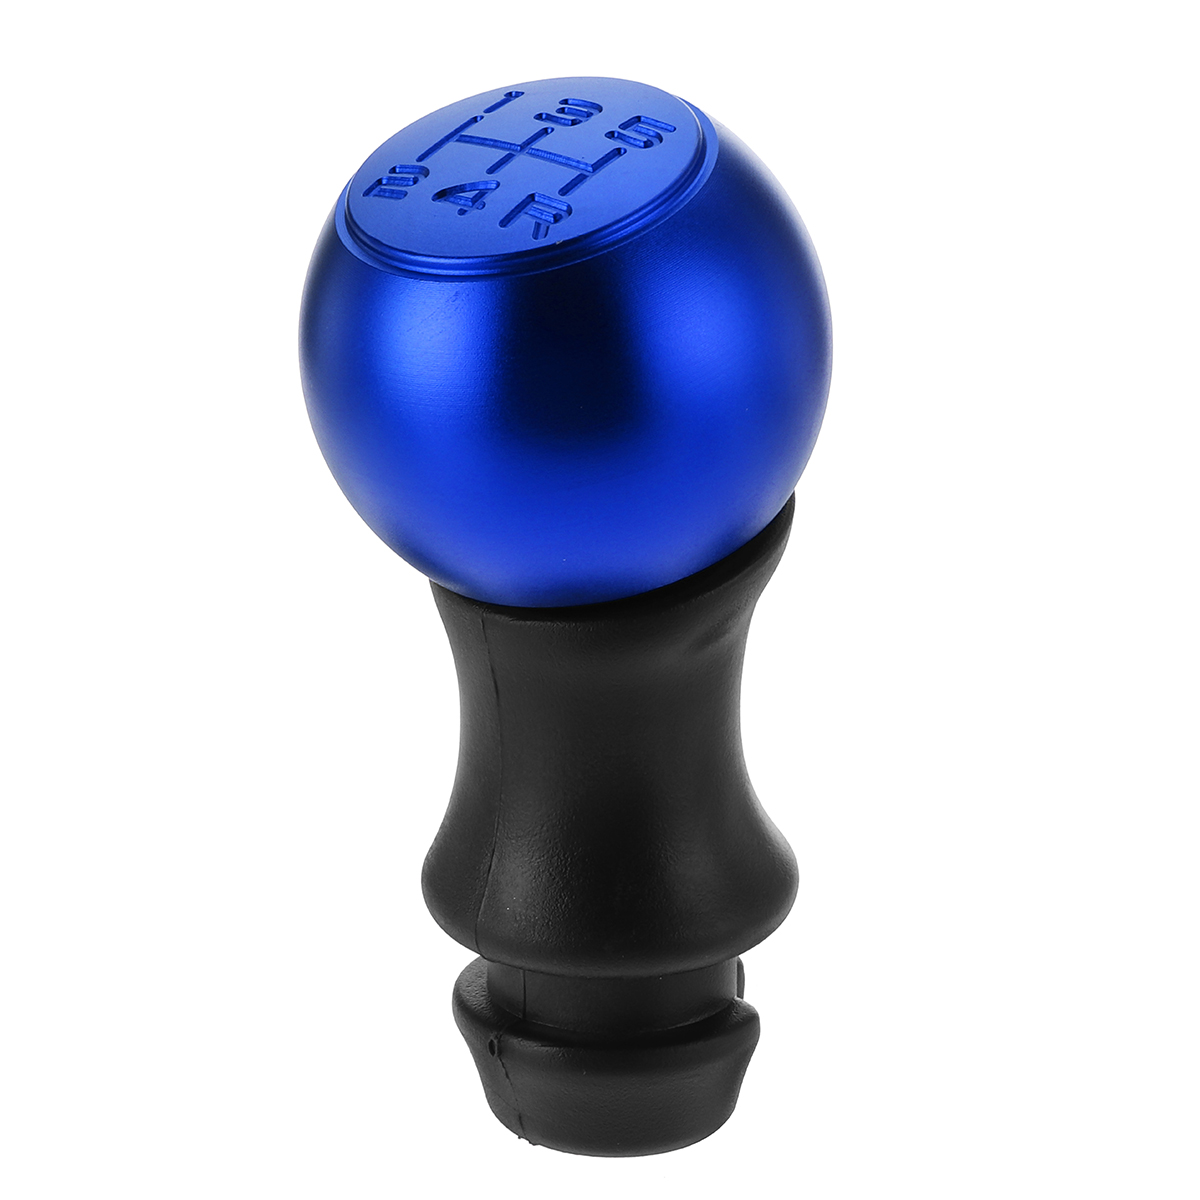 5 Speed Alloy MT Gear Stick Shift Knob for Peugeot 106 206 207 307 308 406 408